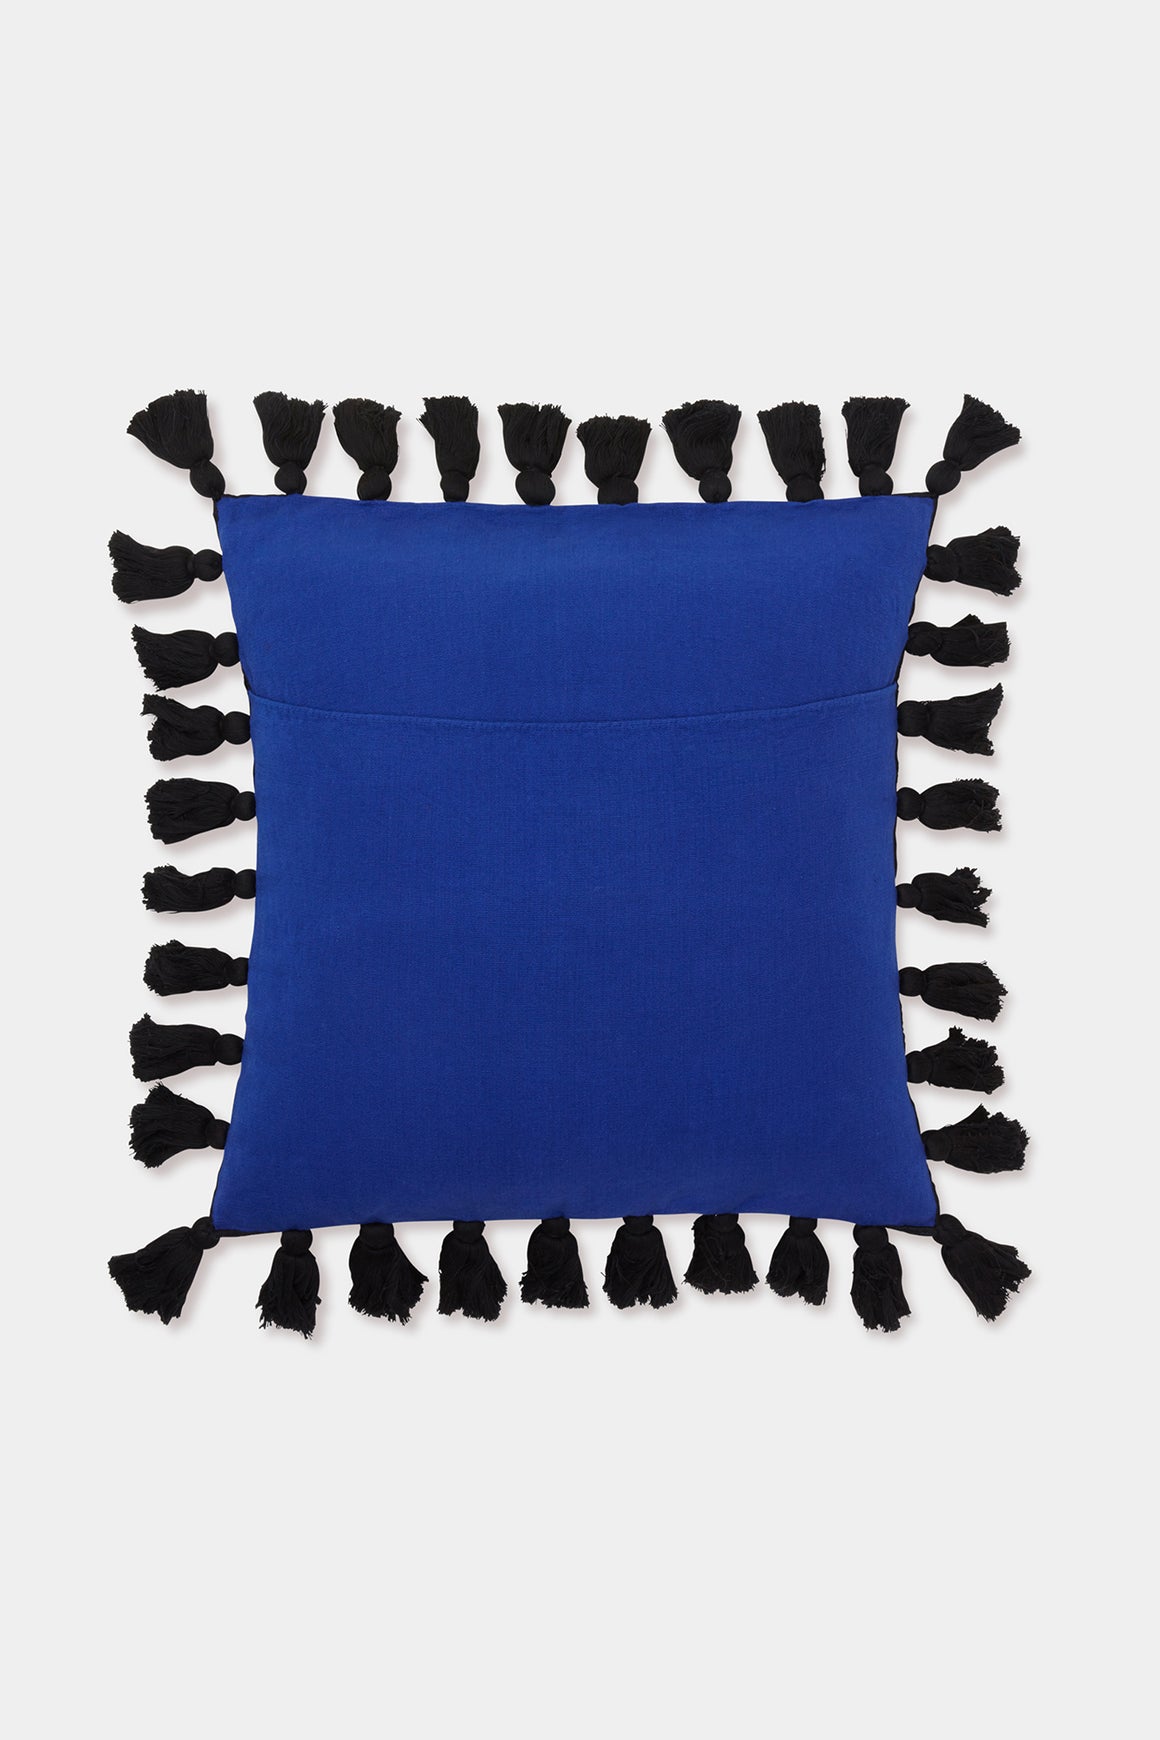 COLVILLE | BUSY DOT CUSHIONS — Colville